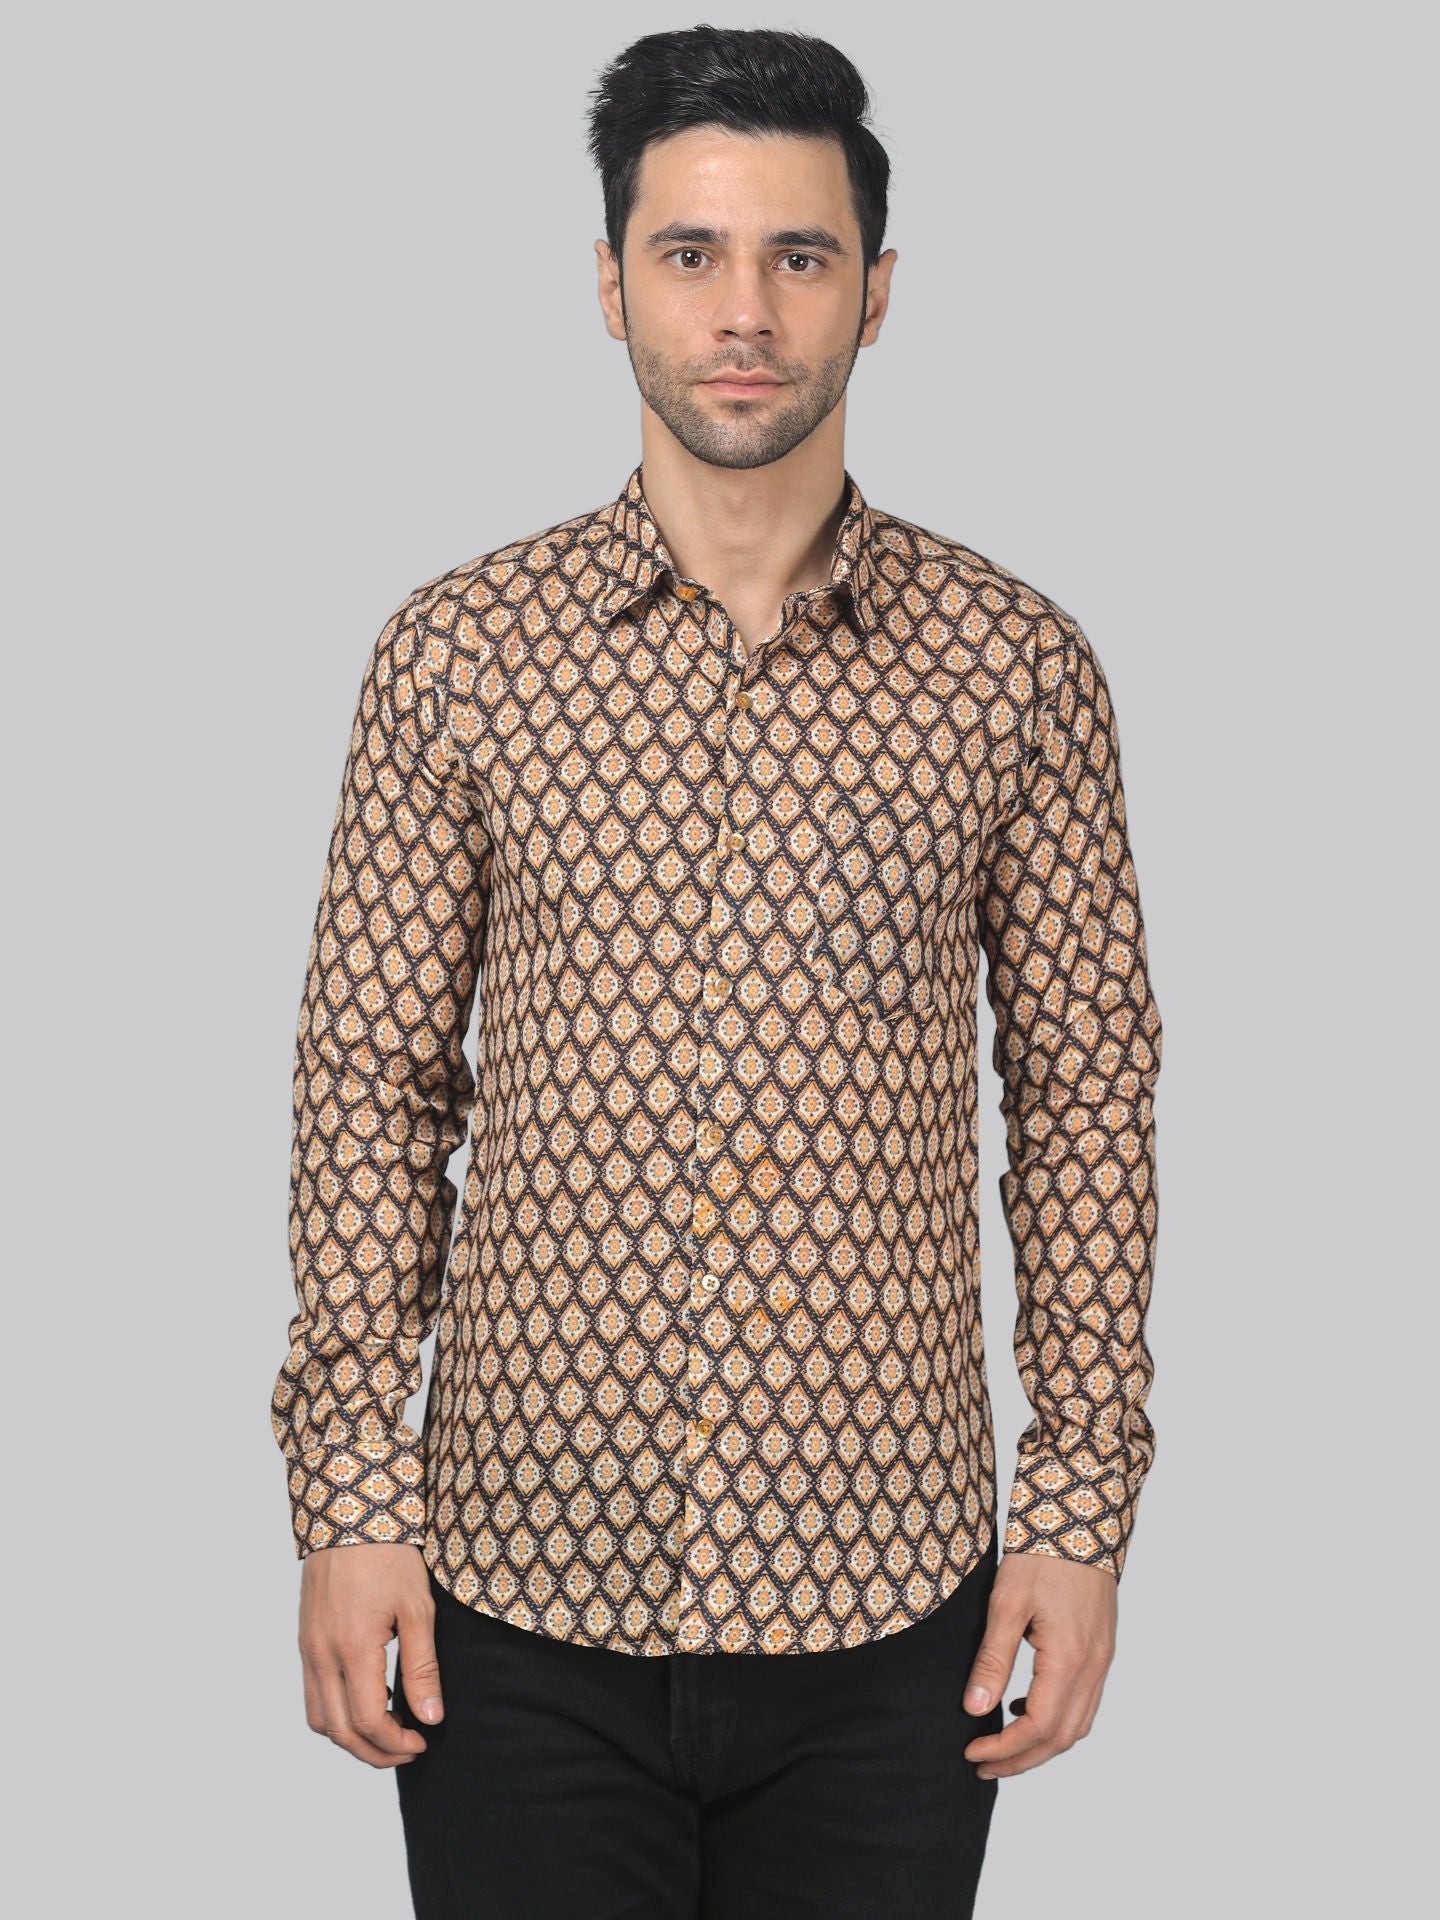 Edgy-romantic Men's Printed Full Sleeve Casual Linen Shirt - TryBuy® USA🇺🇸